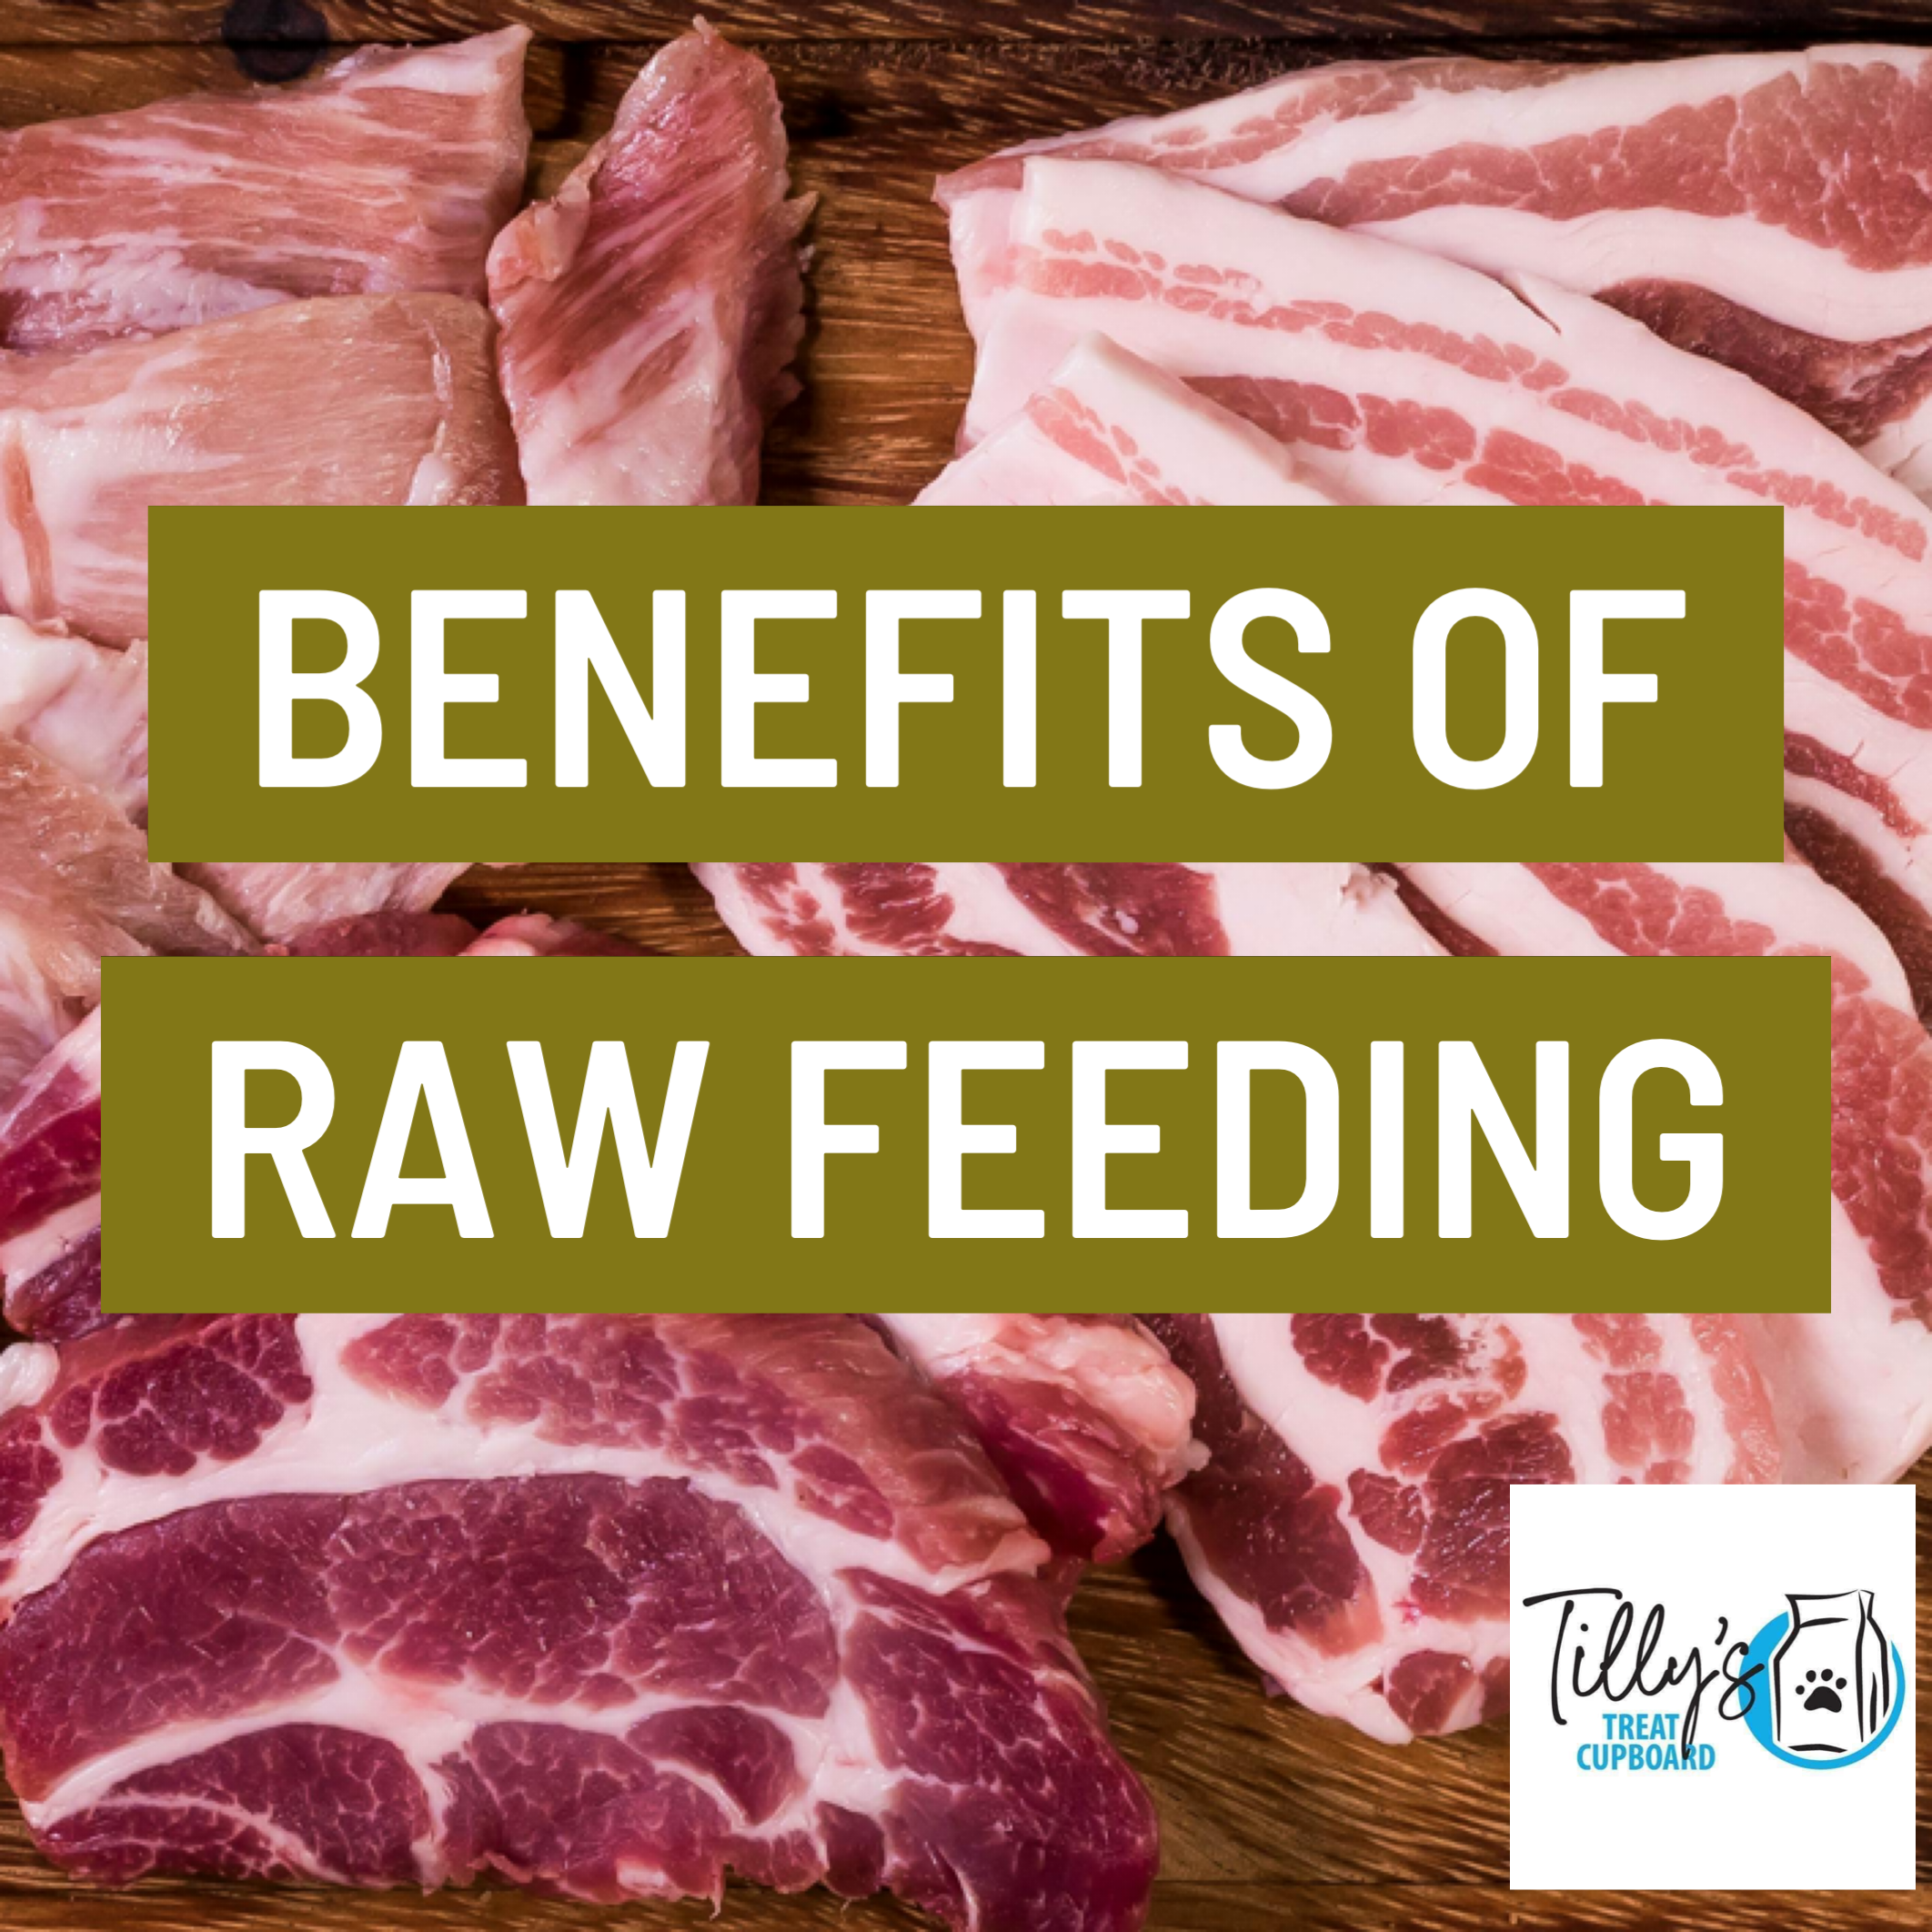 Raw Feeding Week Day 1: What are the benefits of a raw diet?